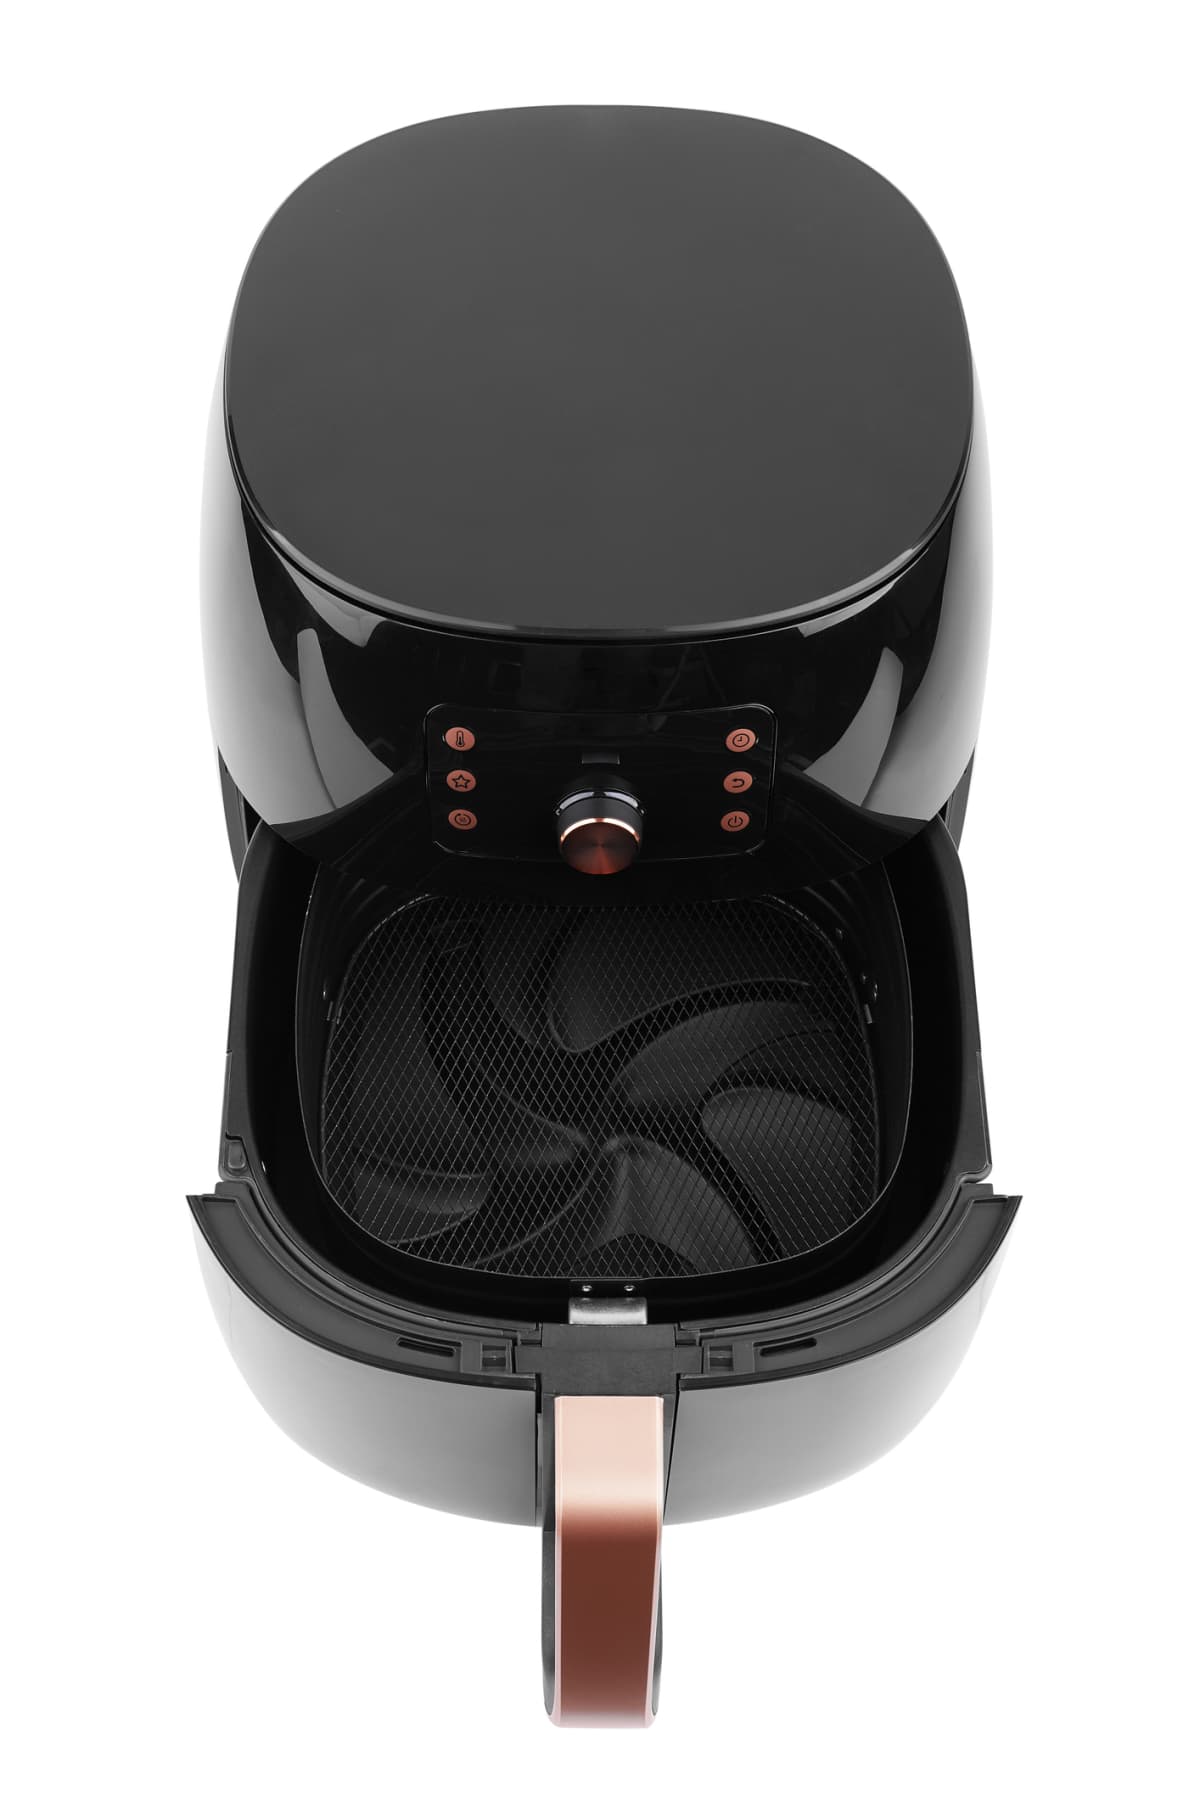 A black air fryer with the basket open on a white background